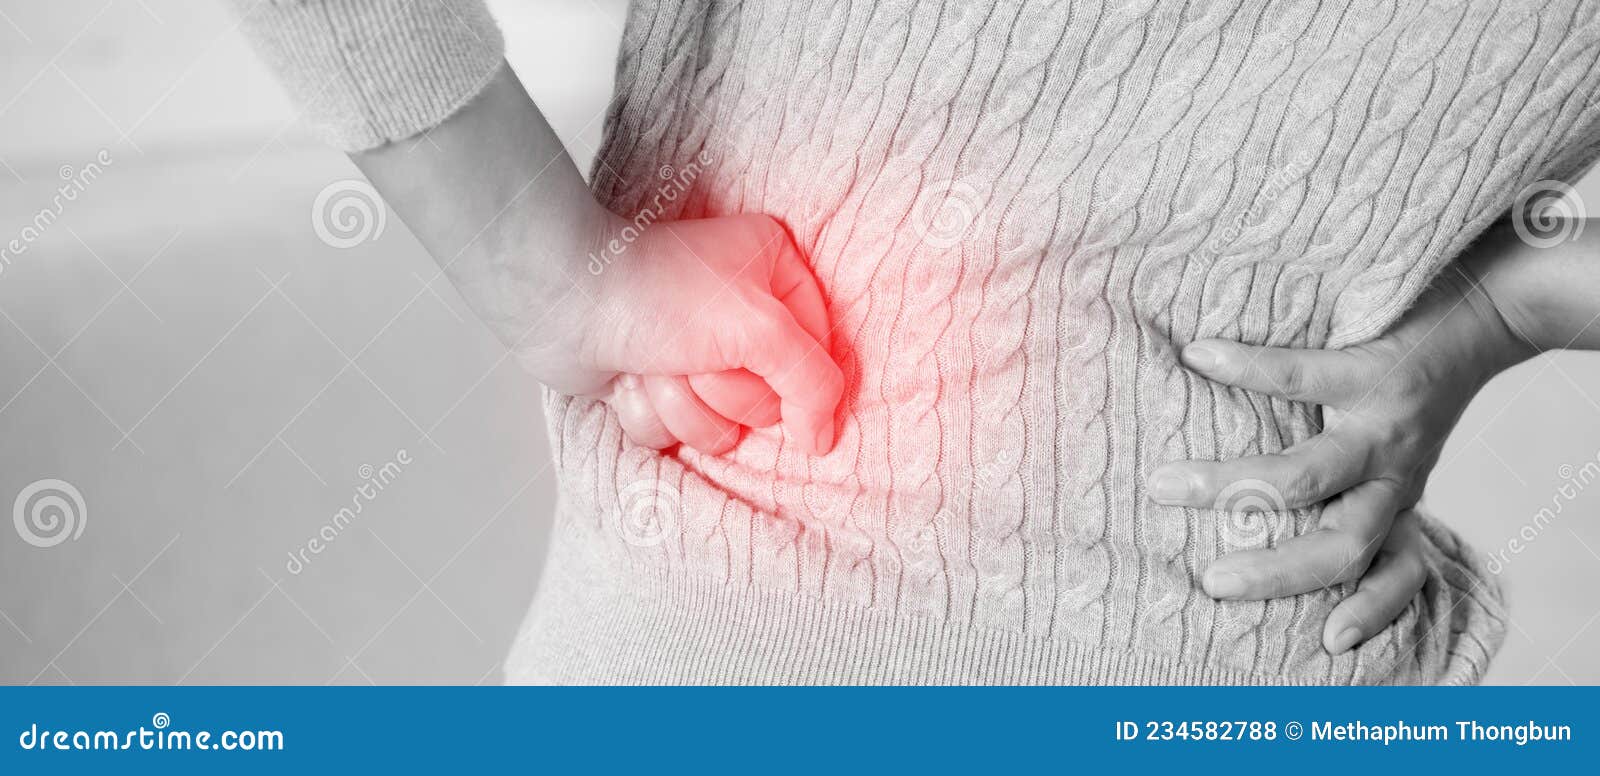 lower back pain is usually caused by a muscle injury.